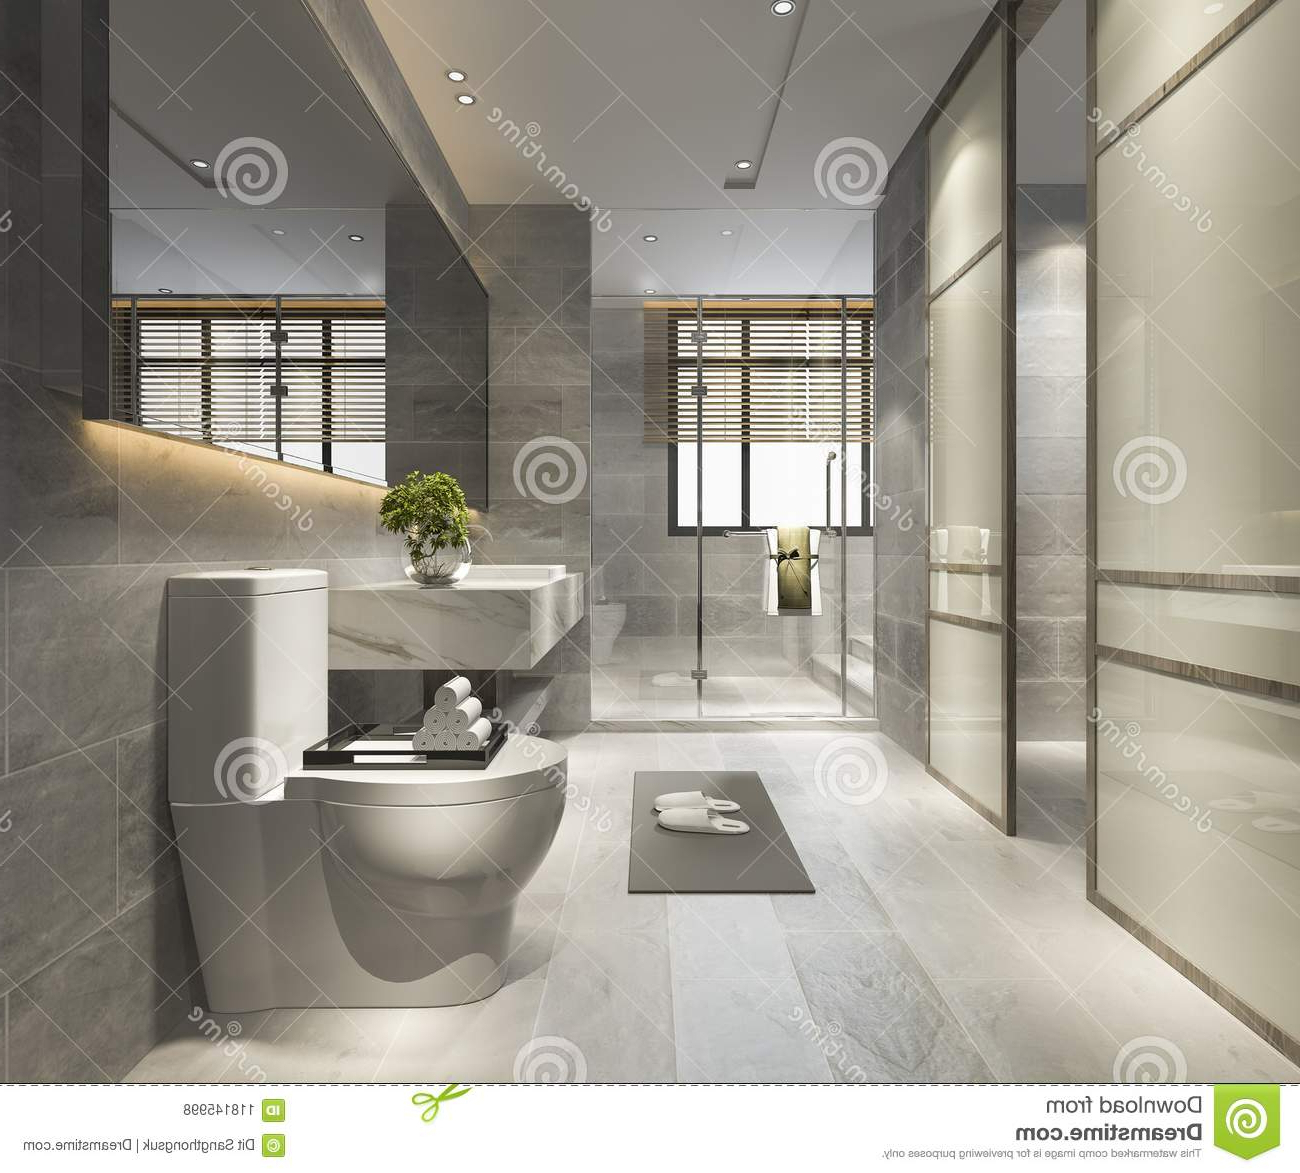 12 Luxury Modern Bathrooms Most Of The Nicest And